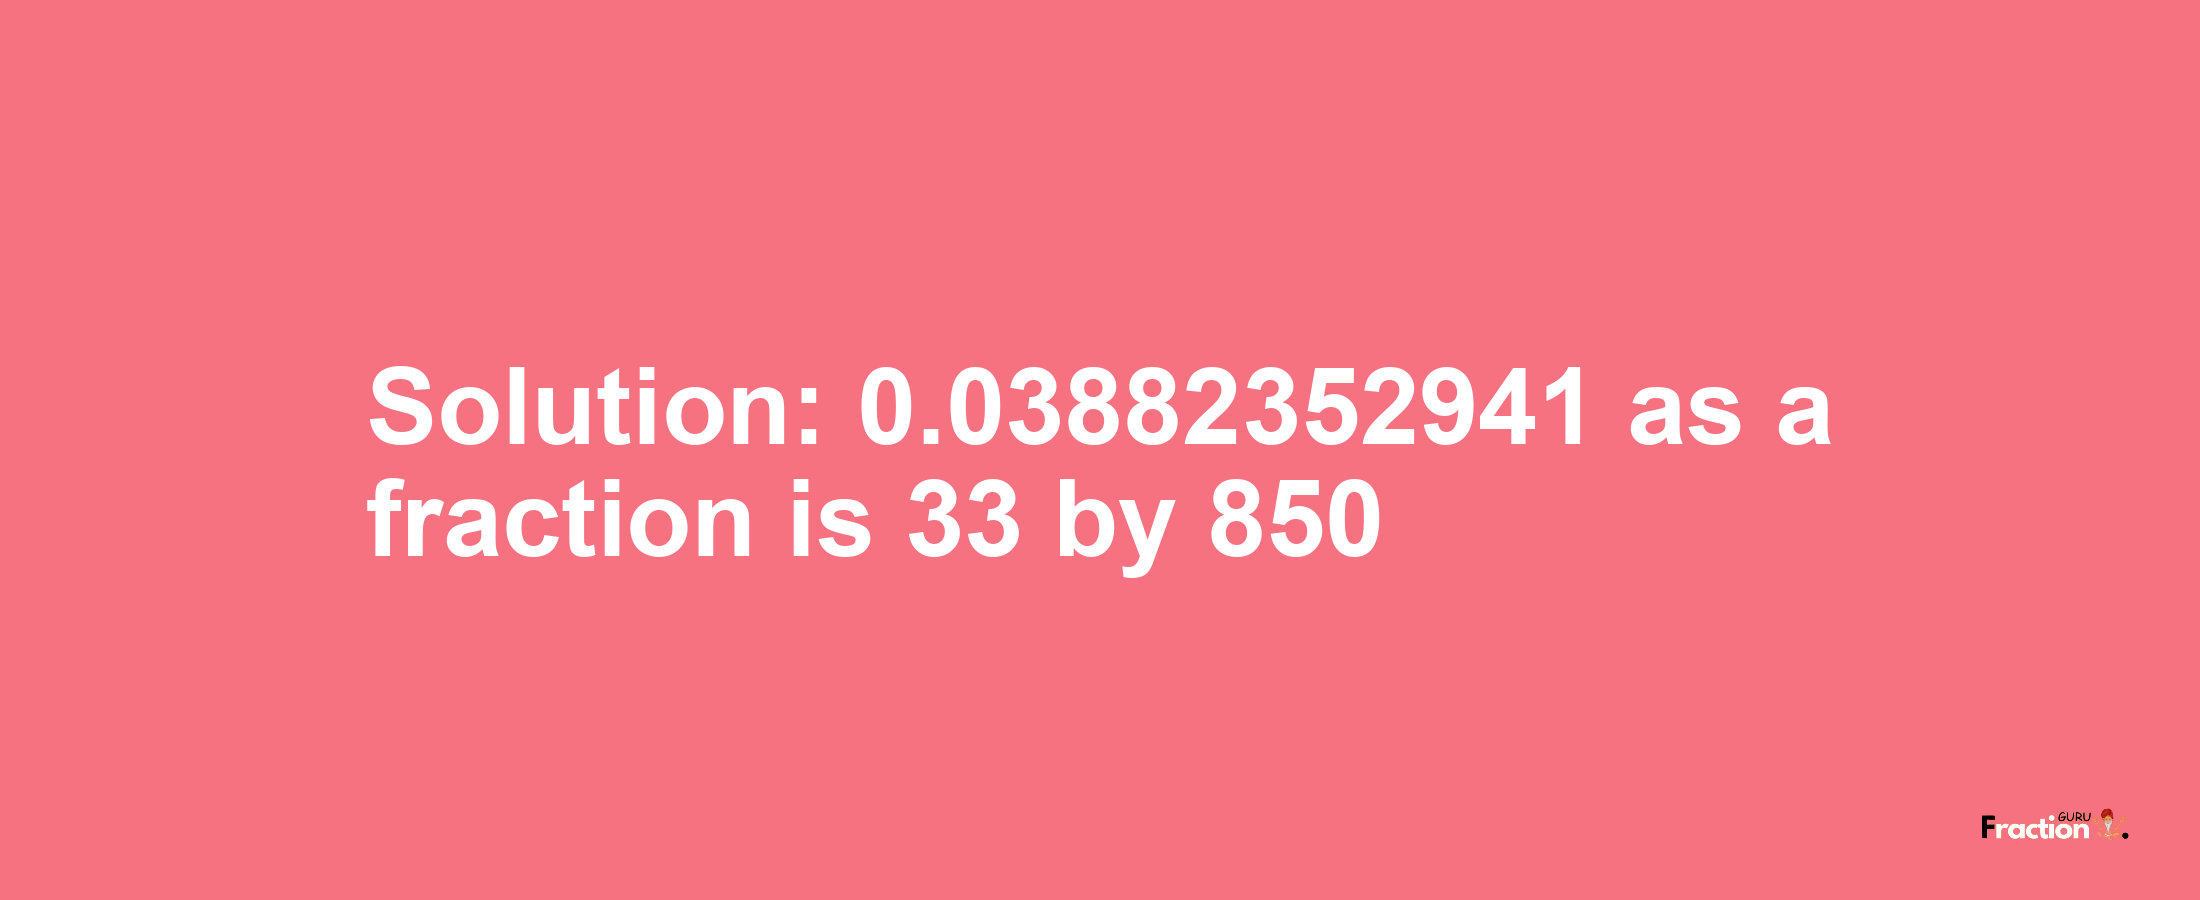 Solution:0.03882352941 as a fraction is 33/850